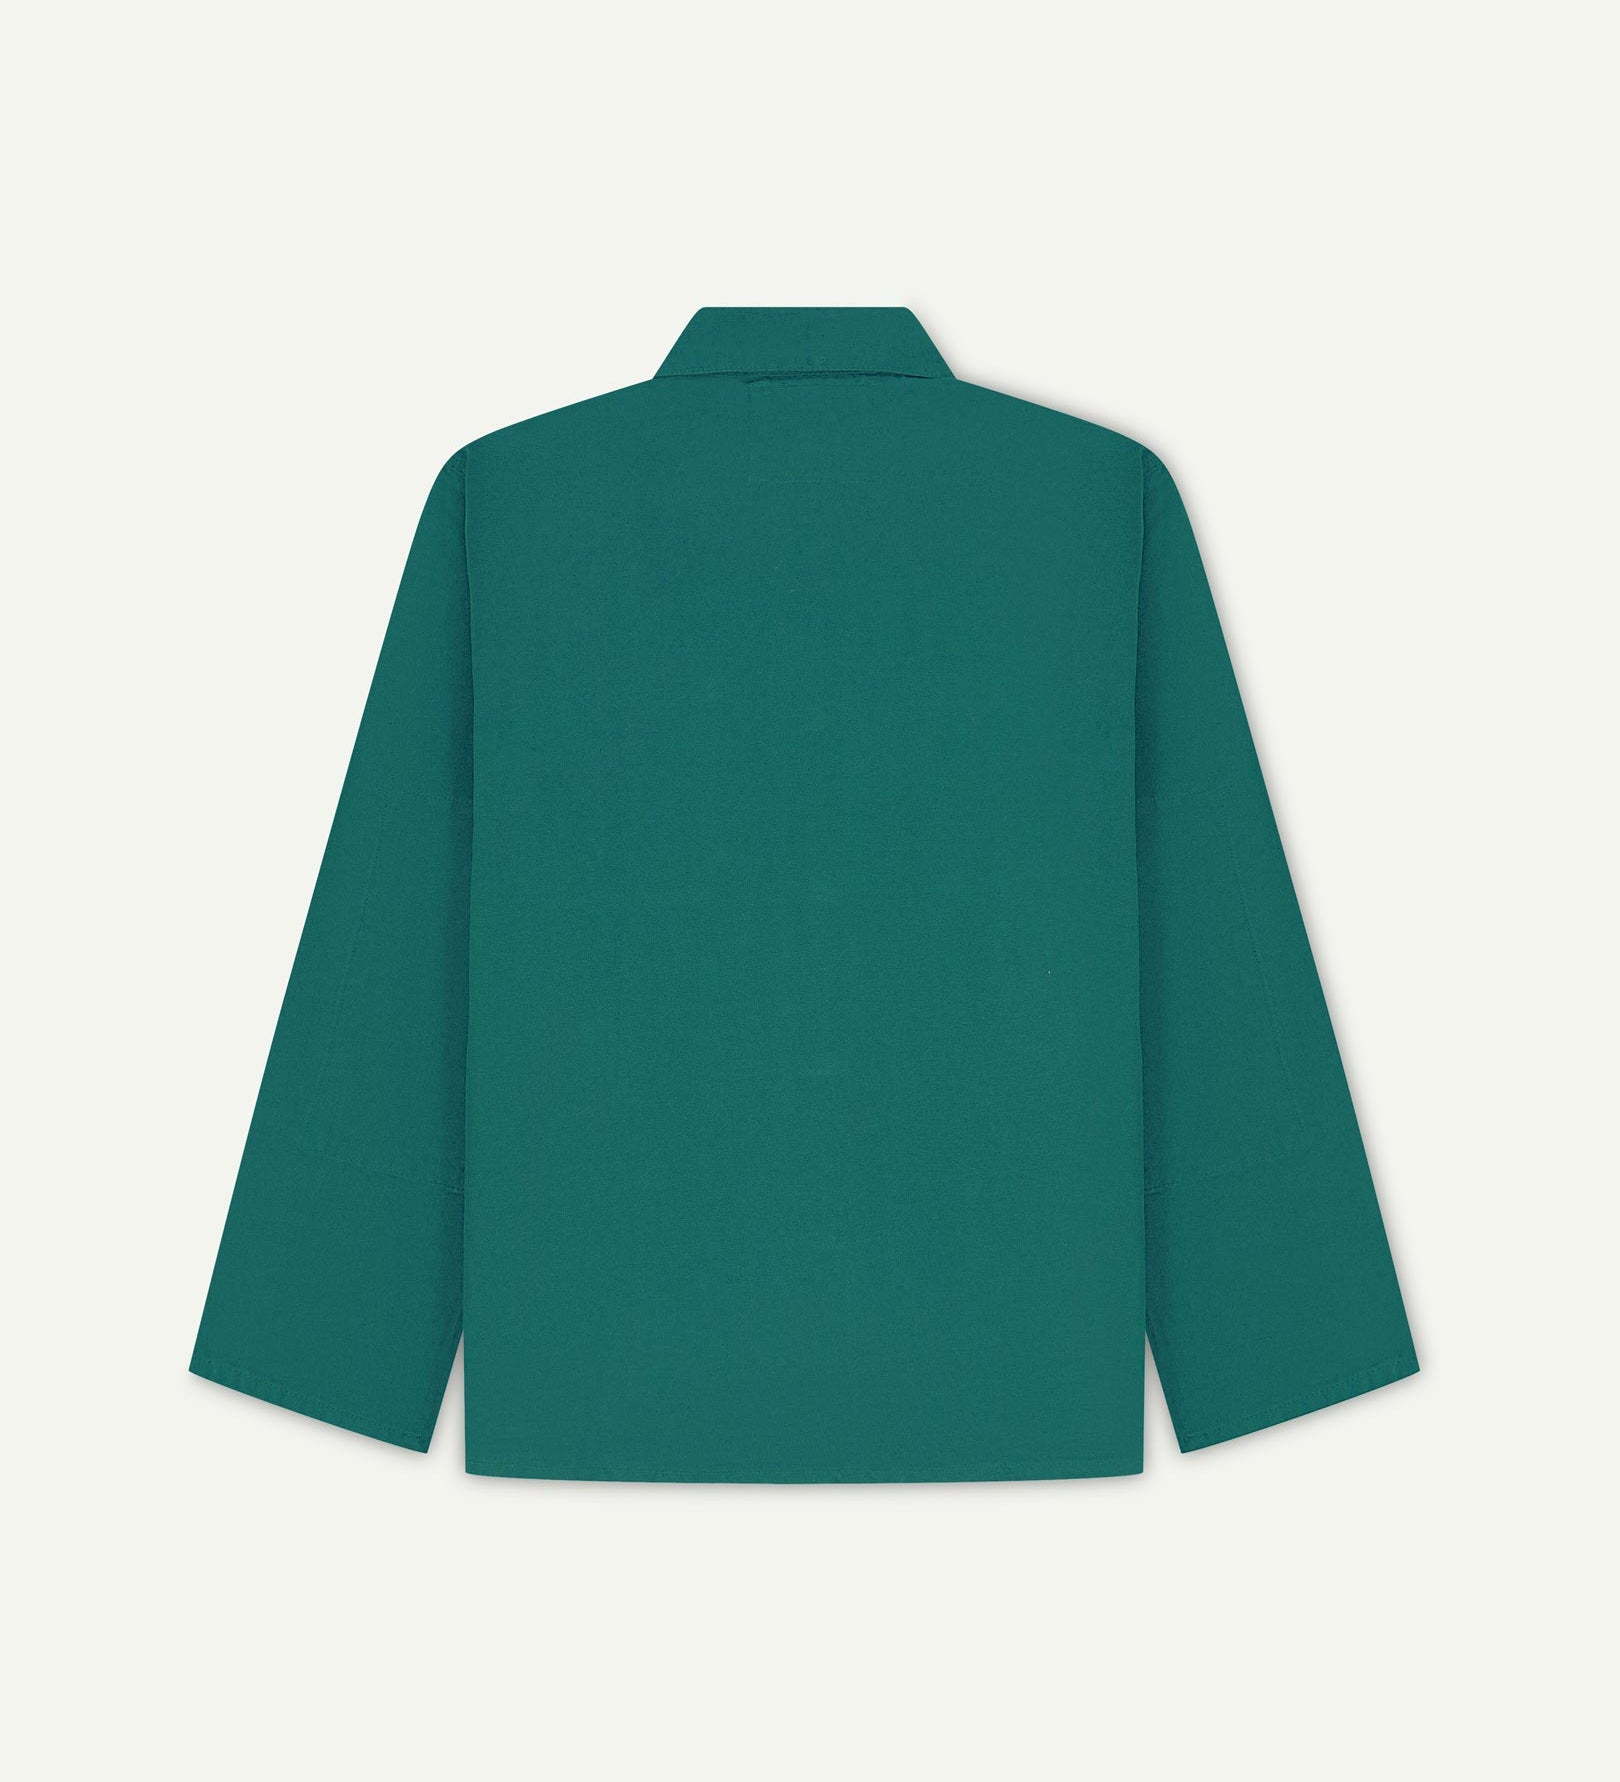 Back view of foam green, buttoned organic cotton overshirt with view of reinforced elbow area and boxy silhouette.